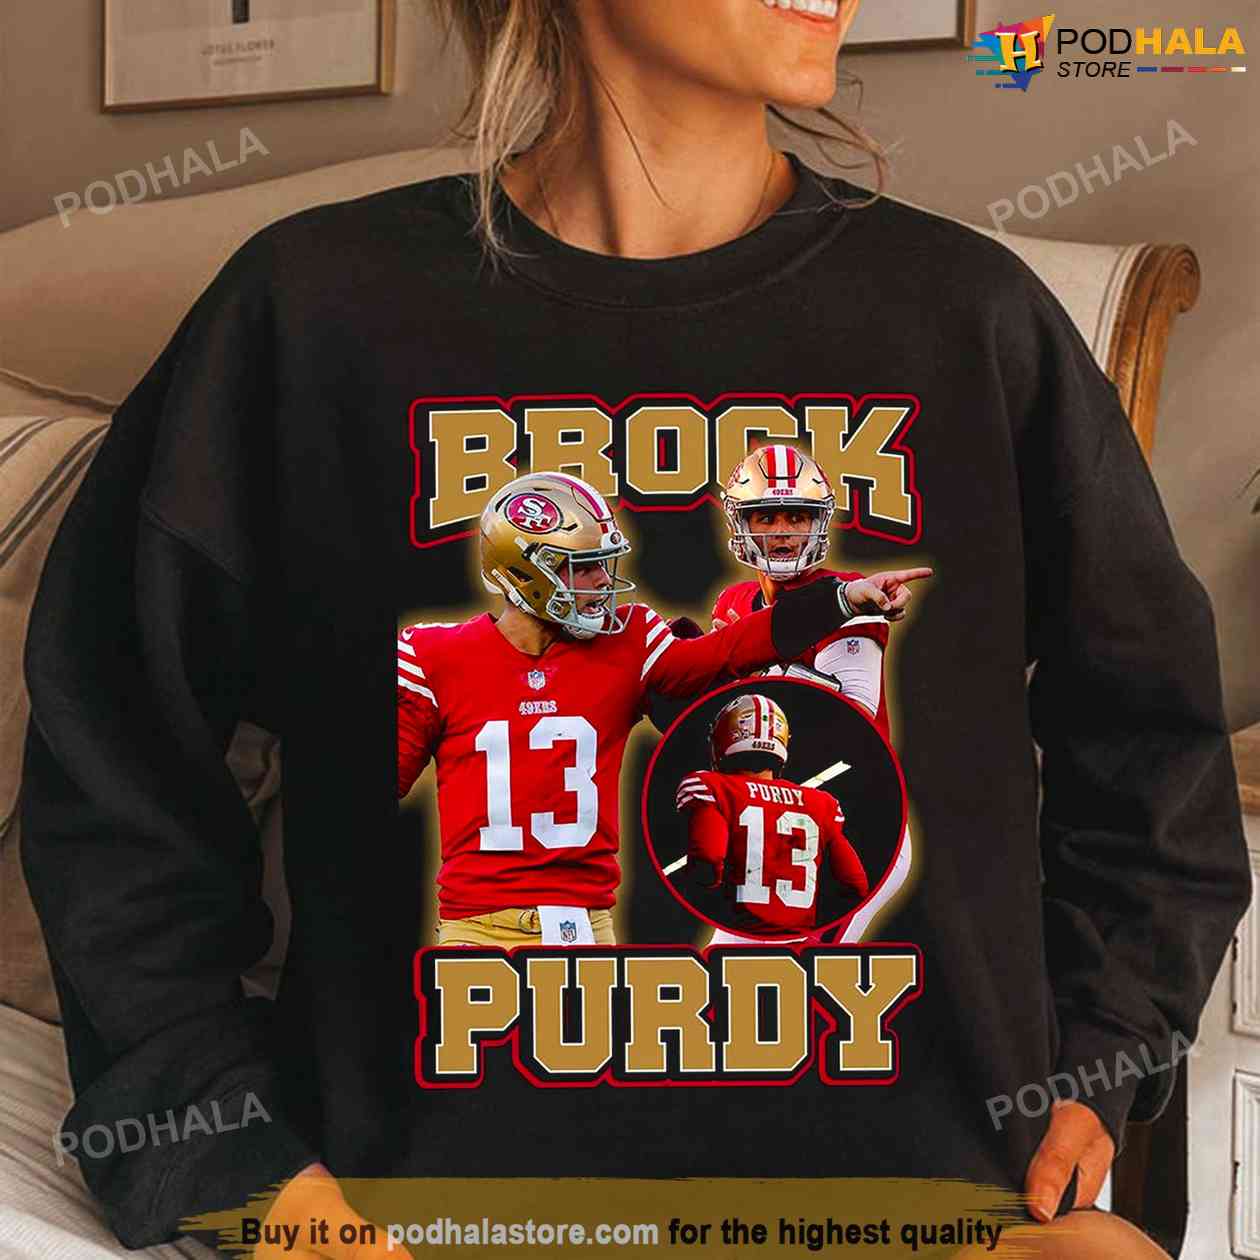 forty niners ugly sweater